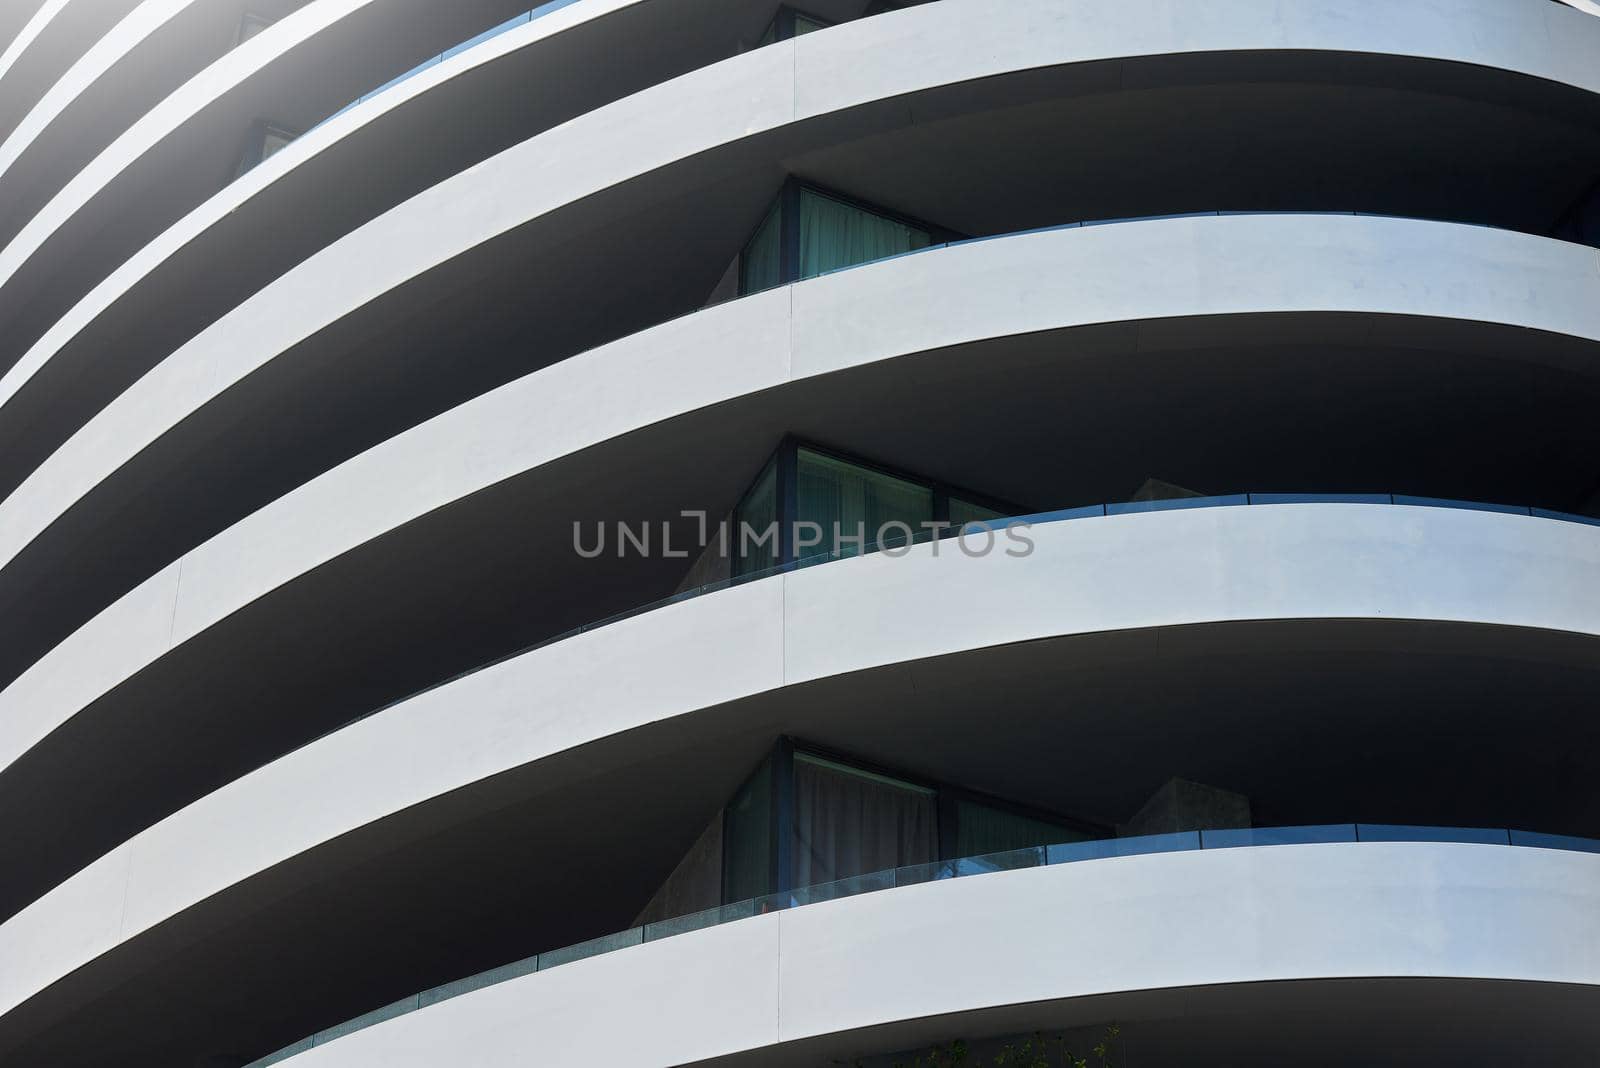 Abstract image of a modern building with rounded edges.